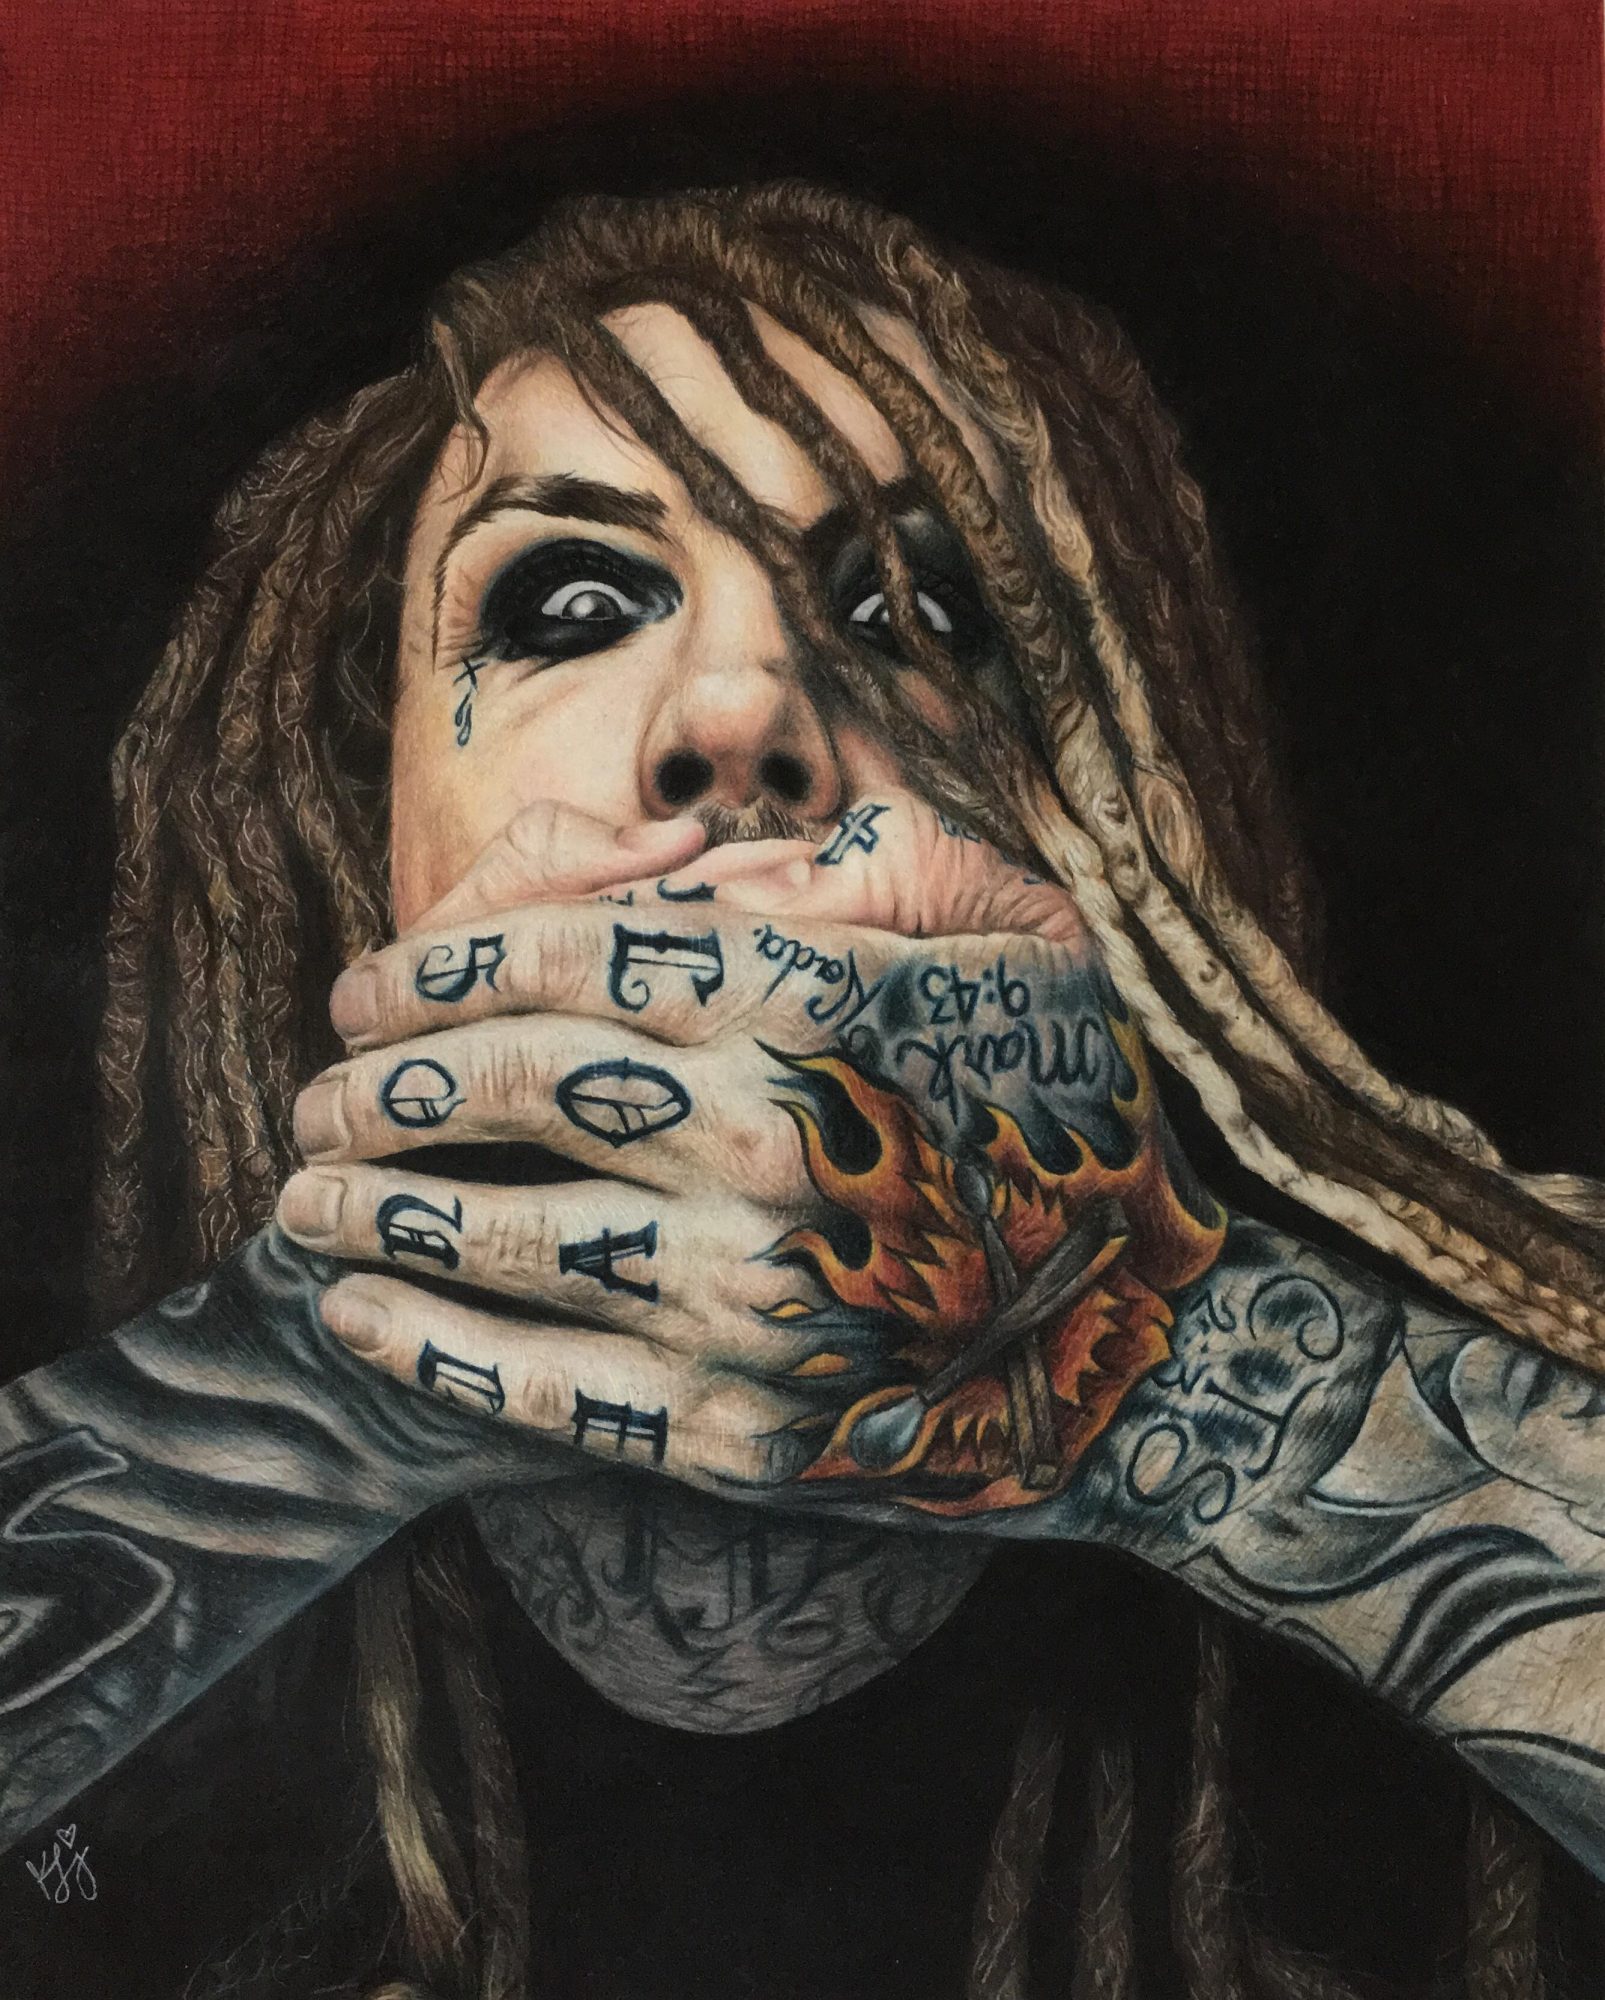 brian_welch_korn_drawing Voyage Chicago Chicago City Guide